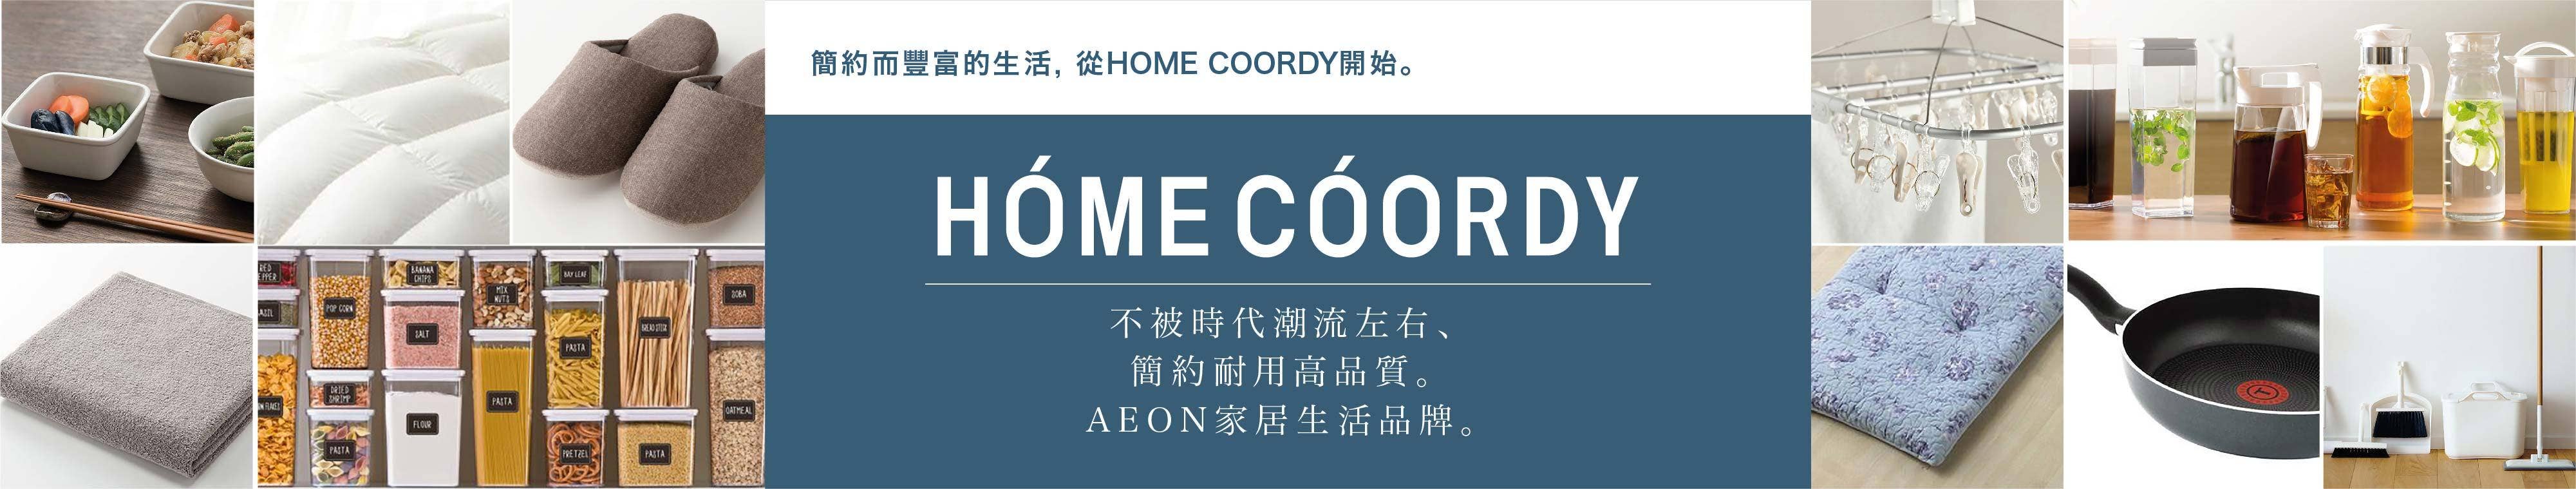 Home Coordy